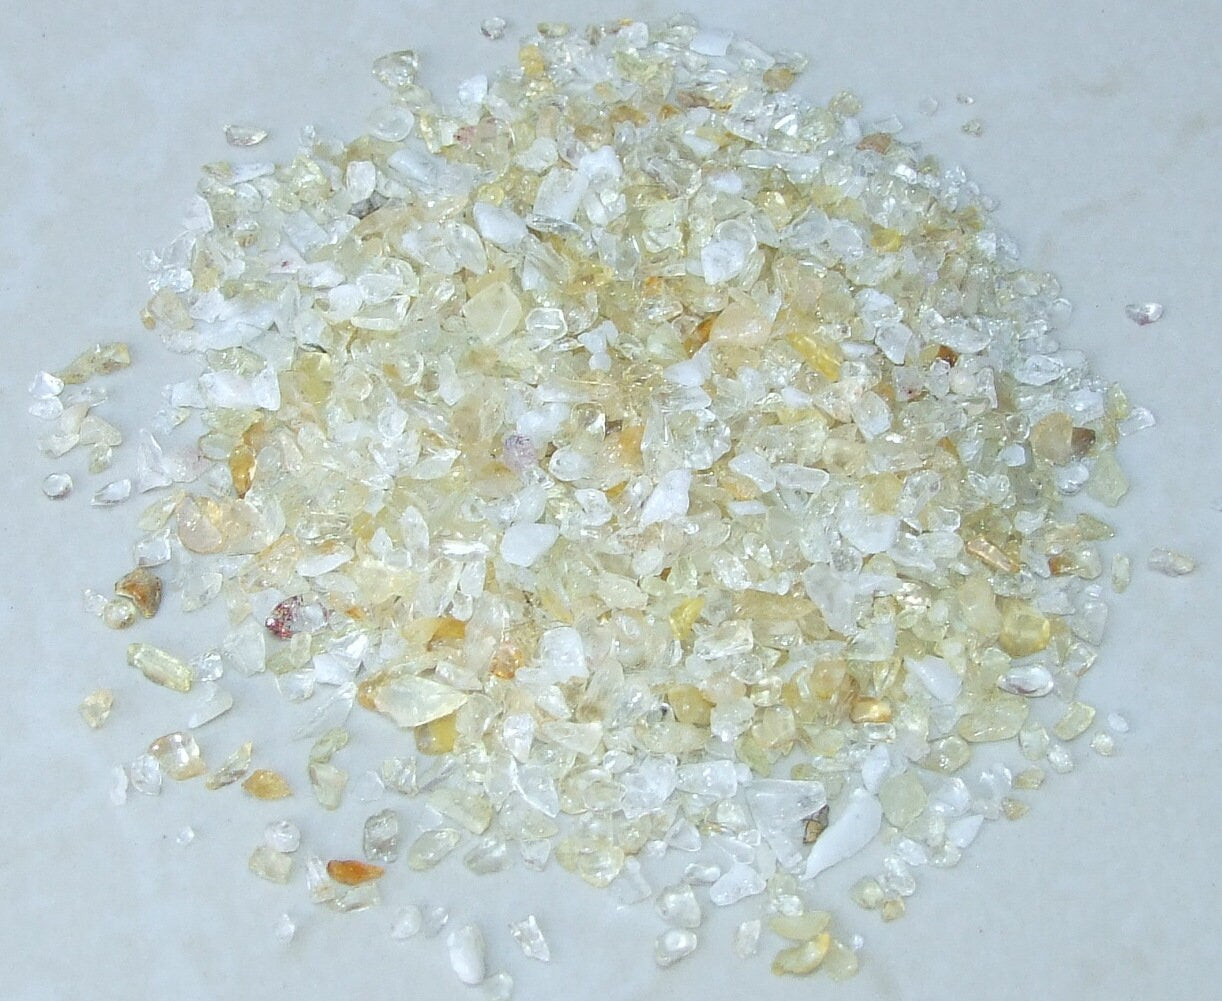 Tiny Gemstone Chips, Small Natural Quartz Crystals Chips, Undrilled Gemstone Beads, Loose Bulk Jewelry Stones Nuggets, 1.5 oz, 2mm to 7mm